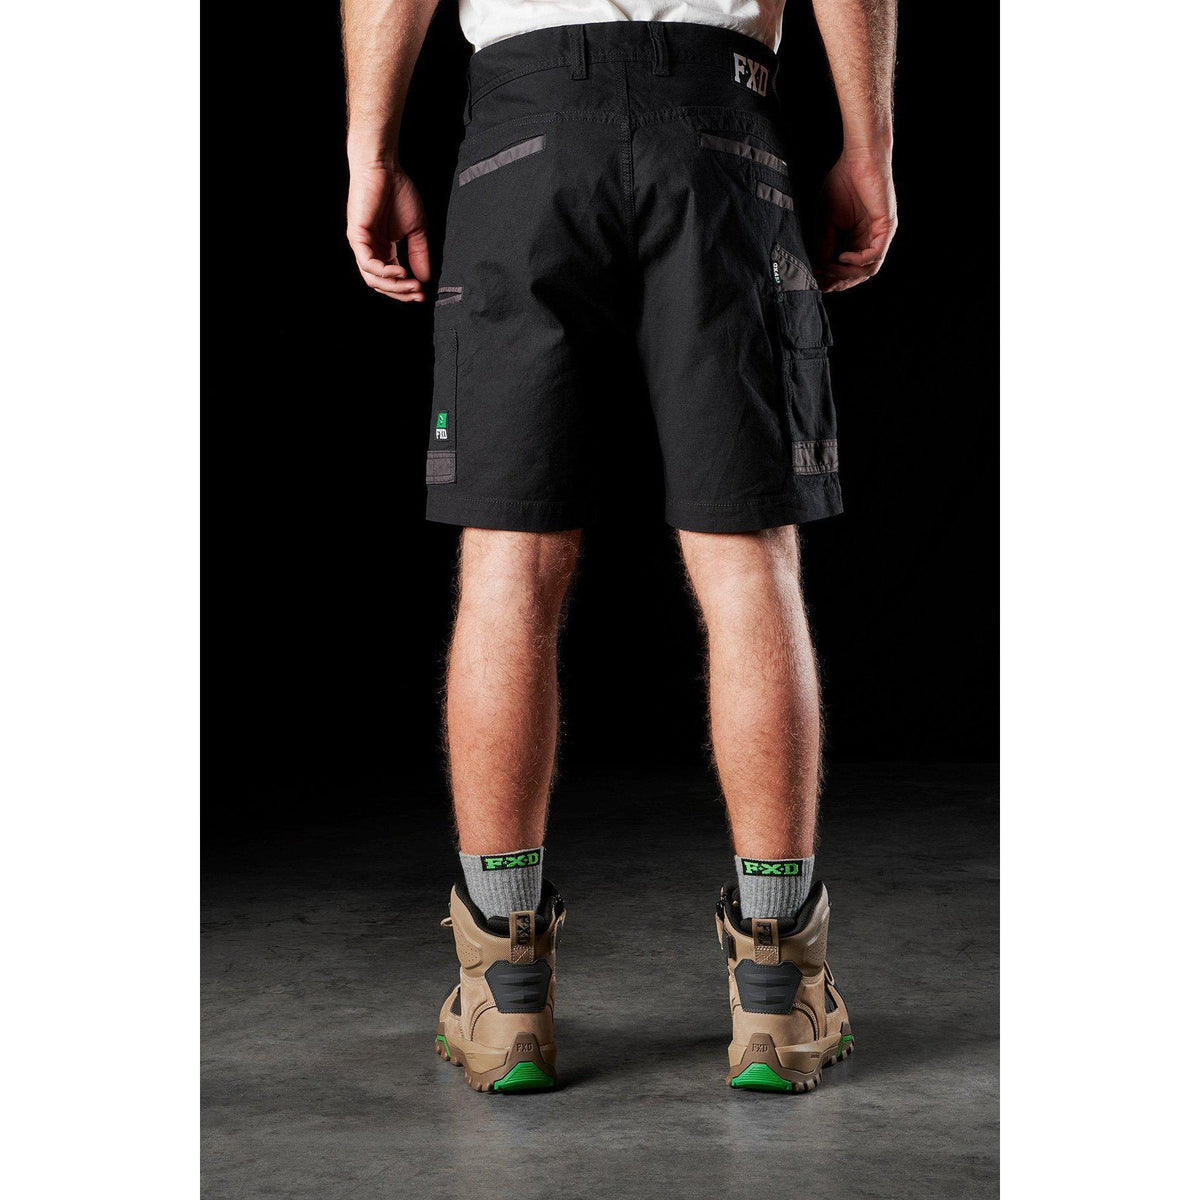 Buy FXD Stretch Shorts - WS-3 Online